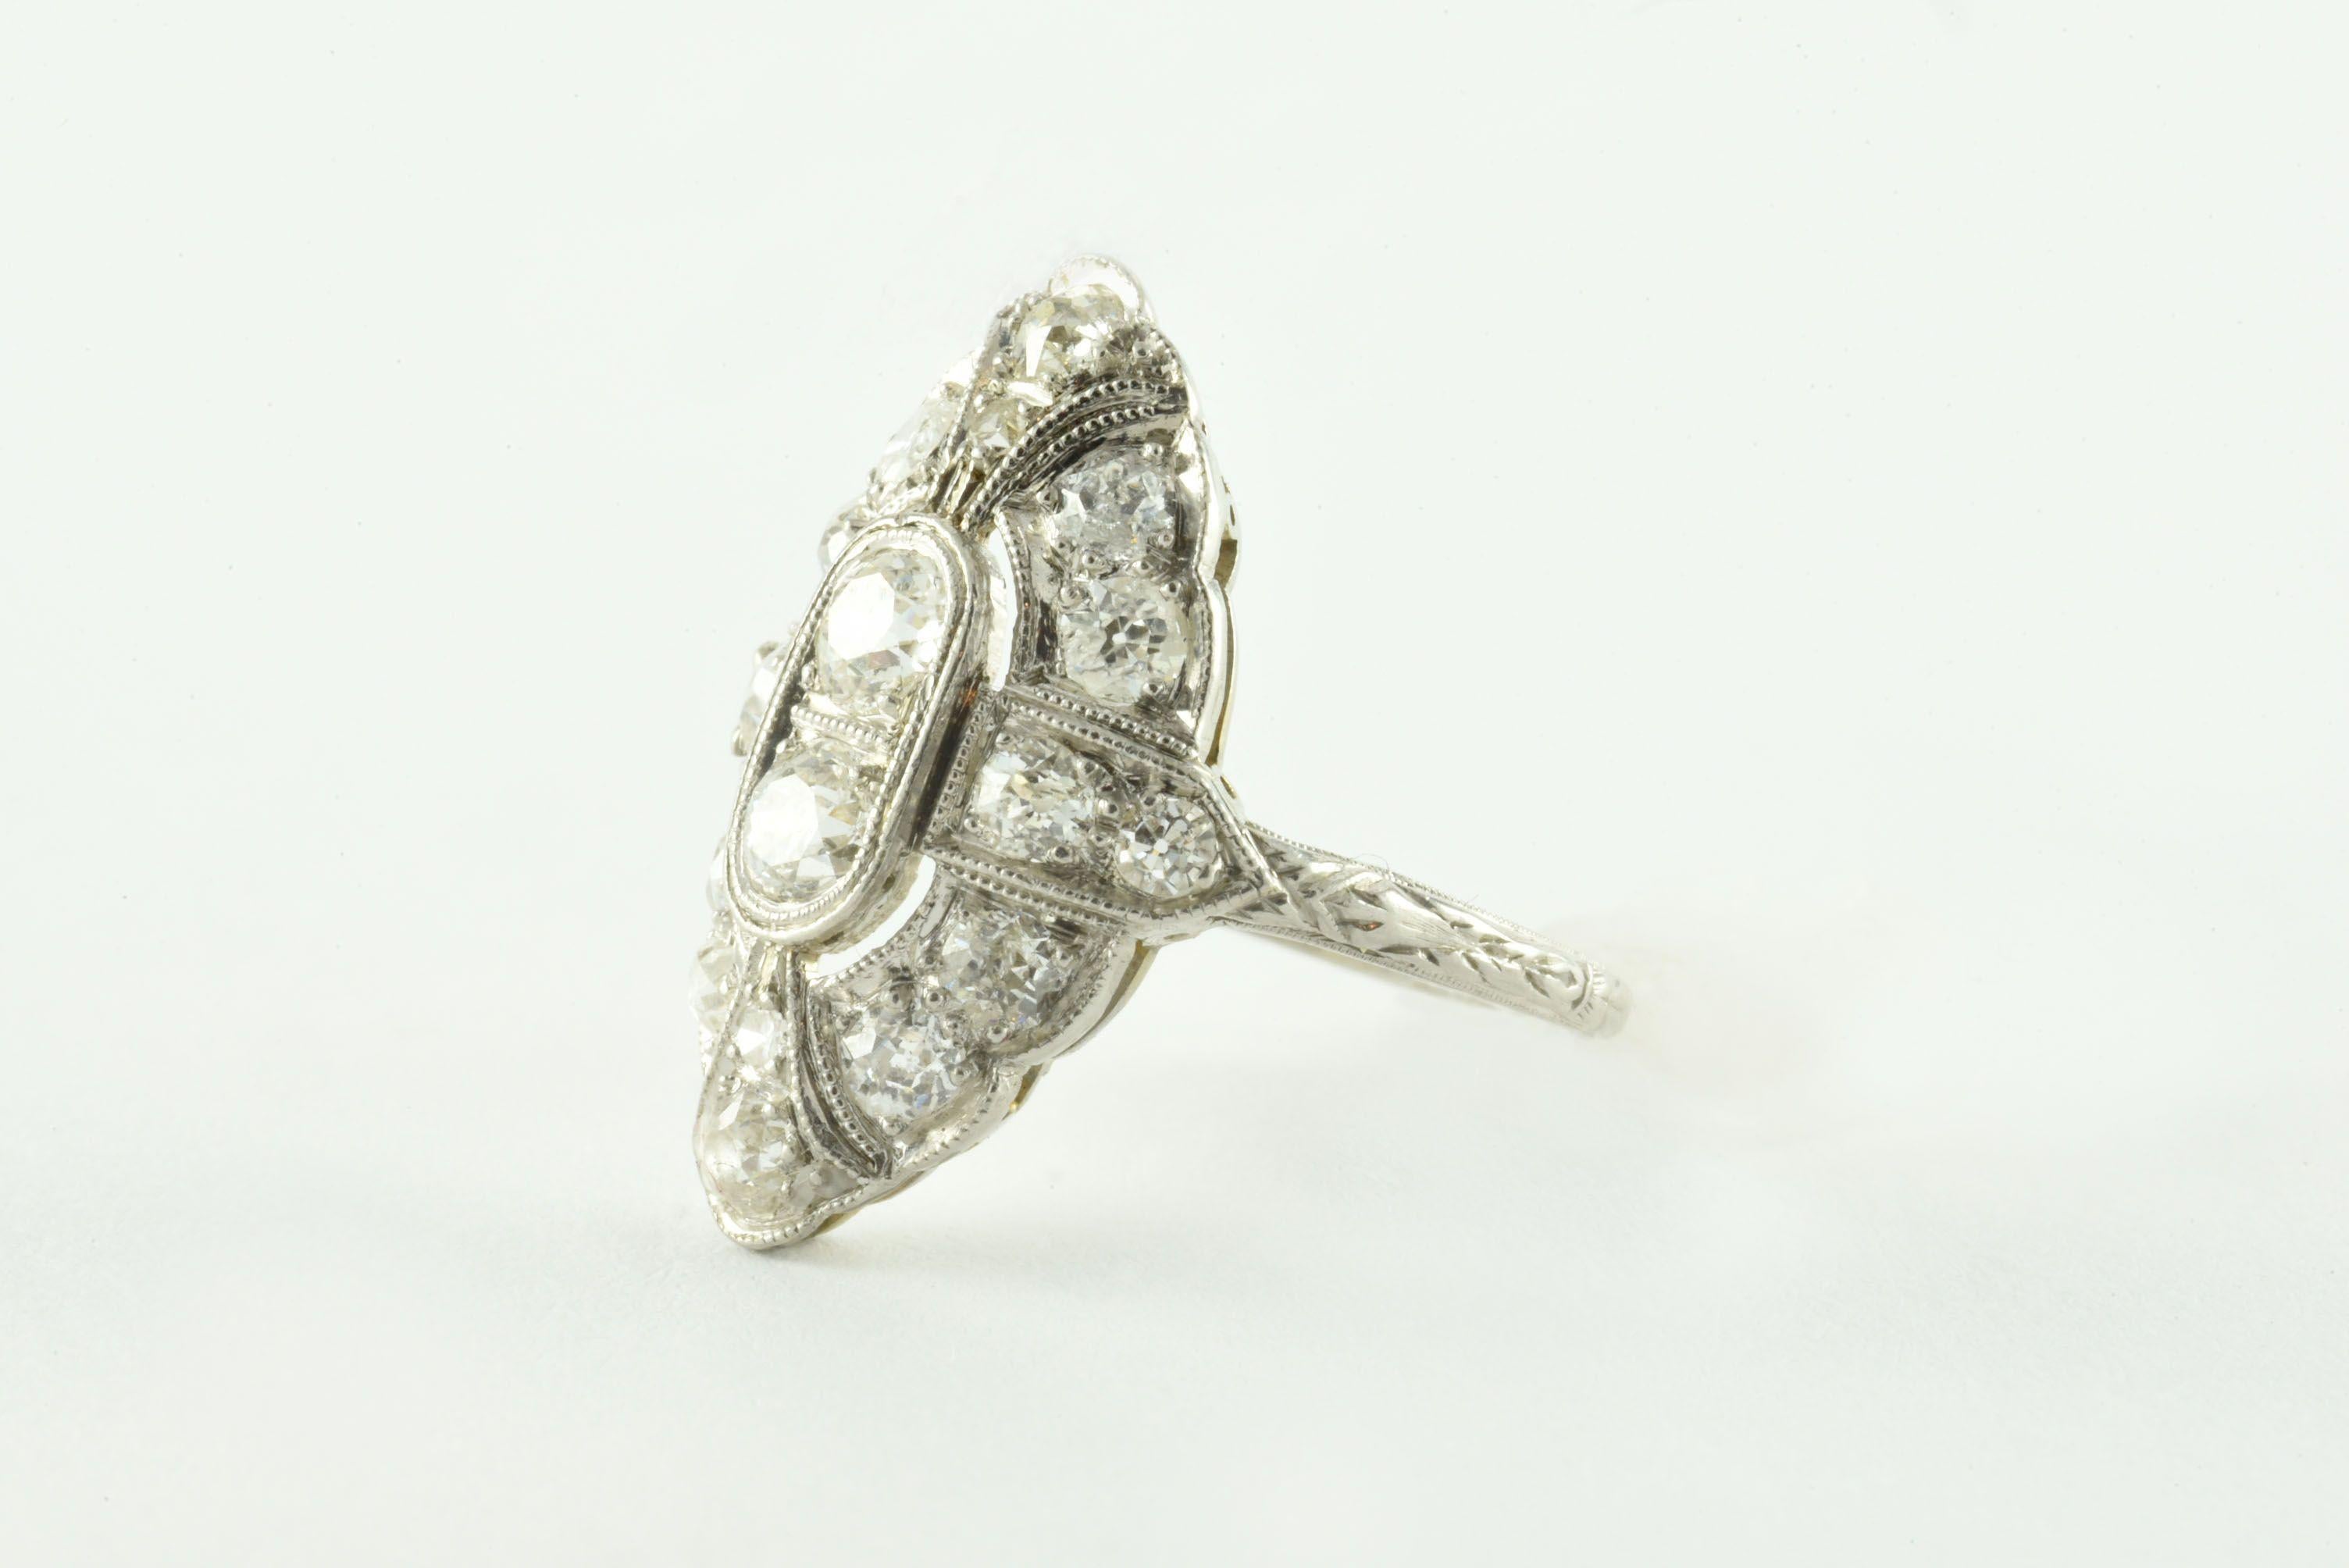 Crafted in the 1920s from platinum, this dazzling Art Deco gem features eighteen Old European cut diamonds, F-G color, VS-SI clarity within a navette-shaped frame, totaling approximately 1.00 carat and accented with delicate milgraining and engraved